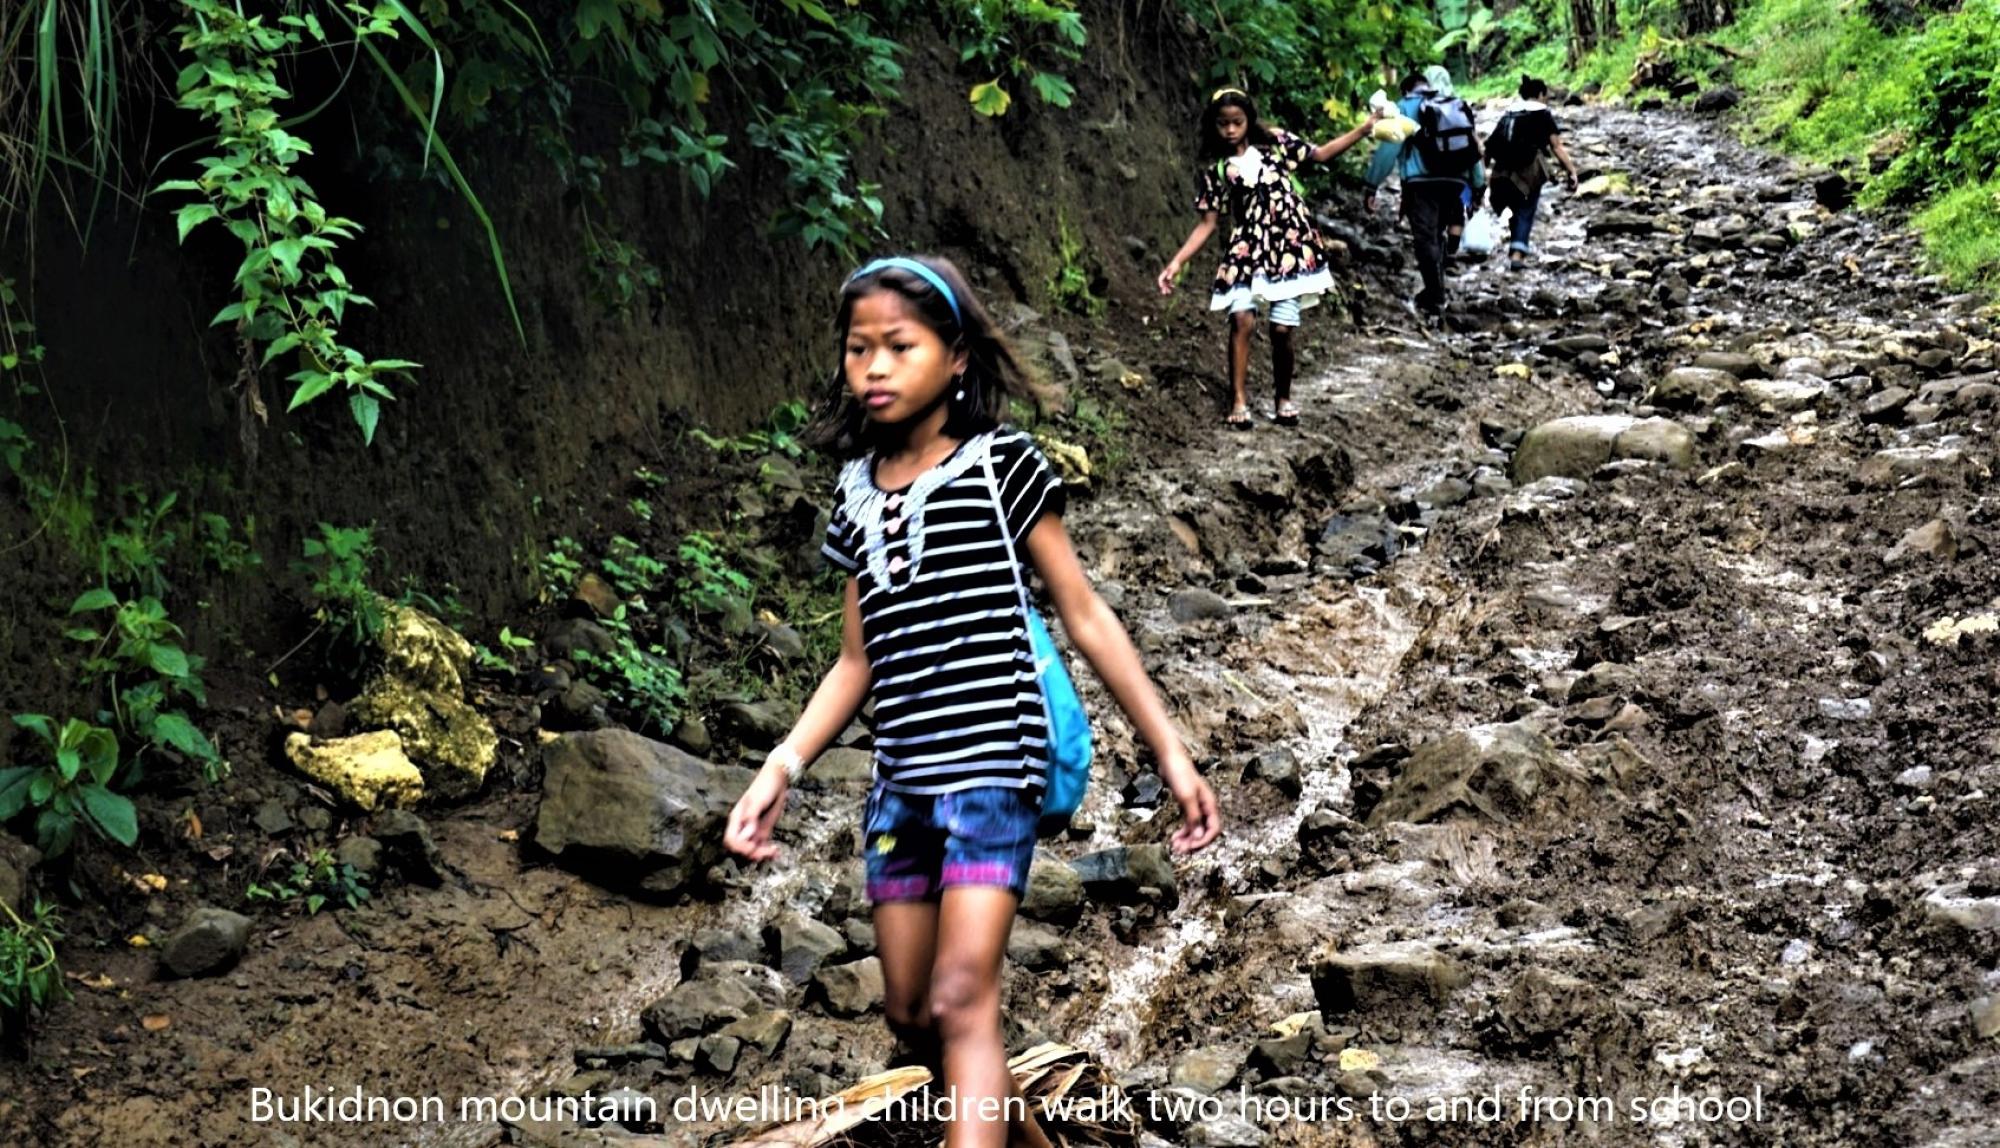 Bukidnon children walk two hours to and from school